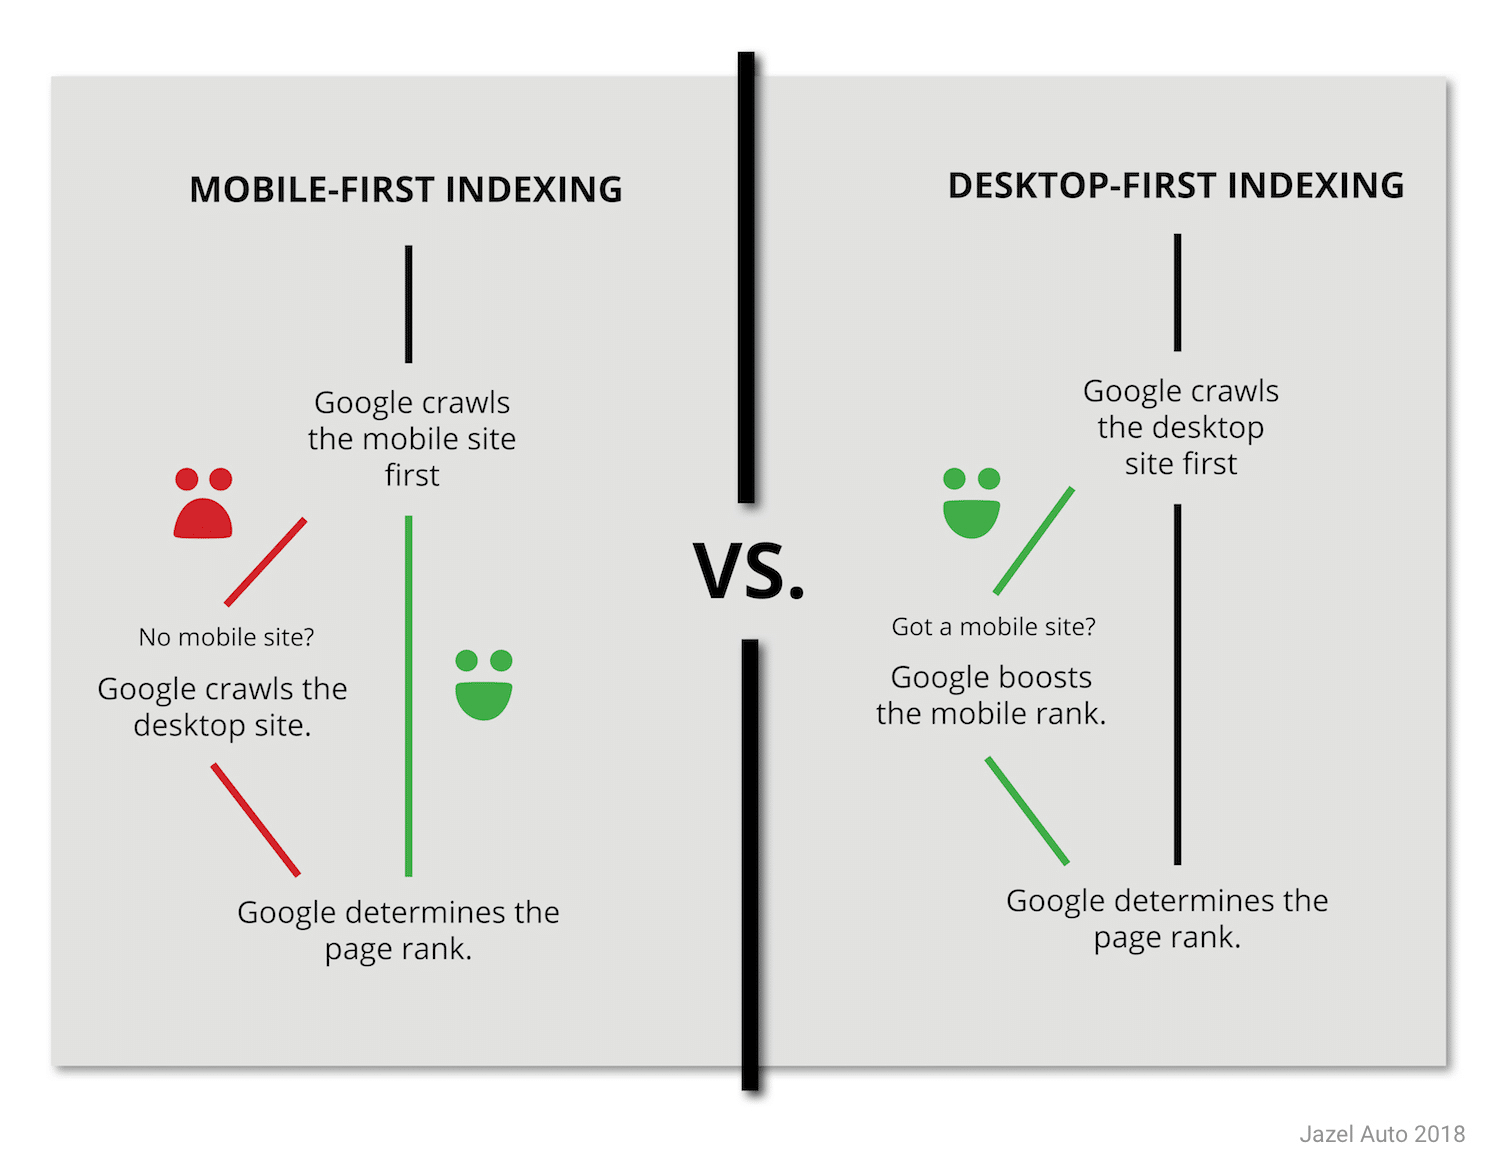 Comment fonctionne l'indexation mobile-first